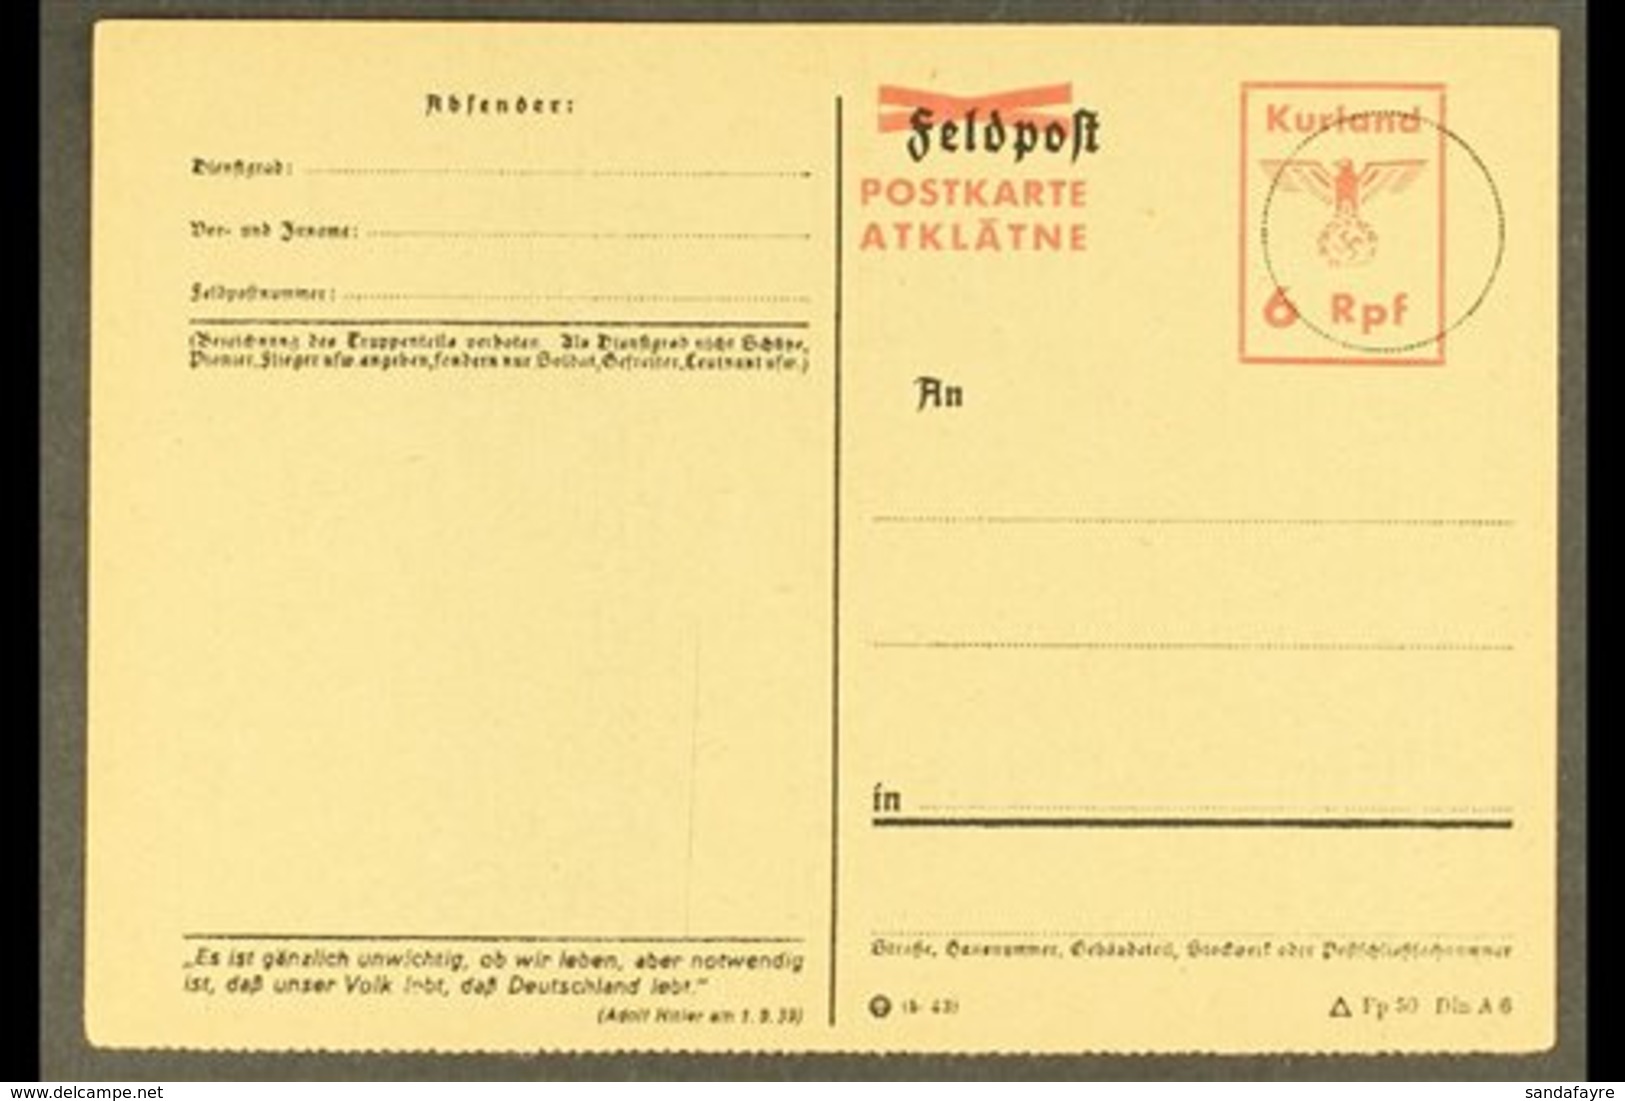 \Y KURLAND\Y 1945 "6 Rpf." Postal Stationery Postal Card With Red "Postkarte / Atklatne" Overprint And Adolf Hitler Quot - Other & Unclassified